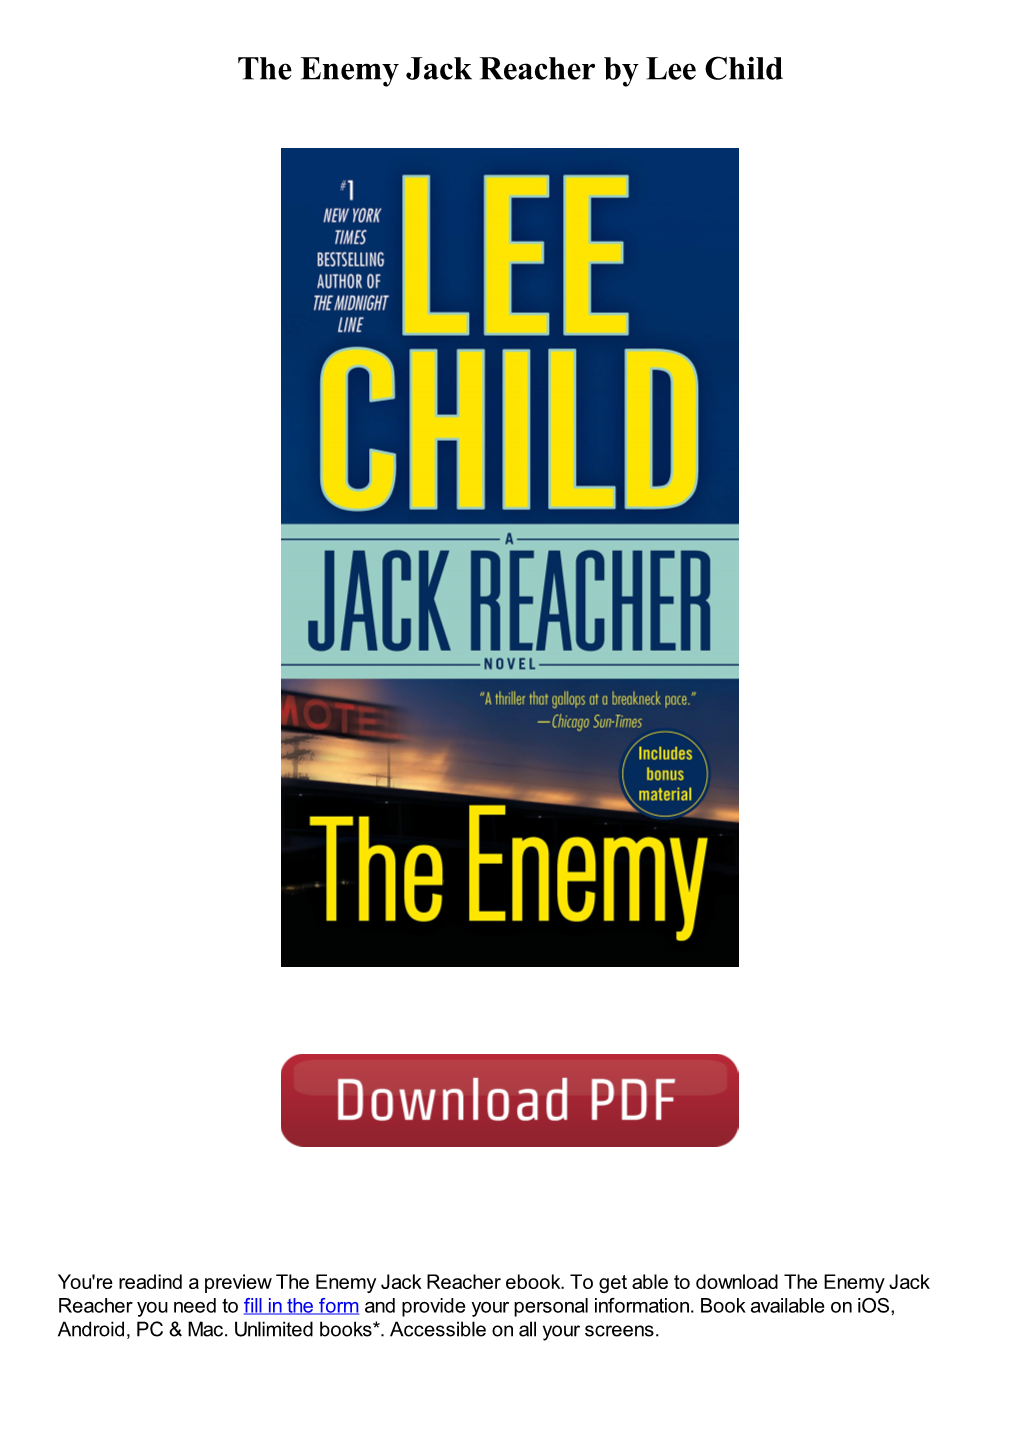 The Enemy Jack Reacher by Lee Child